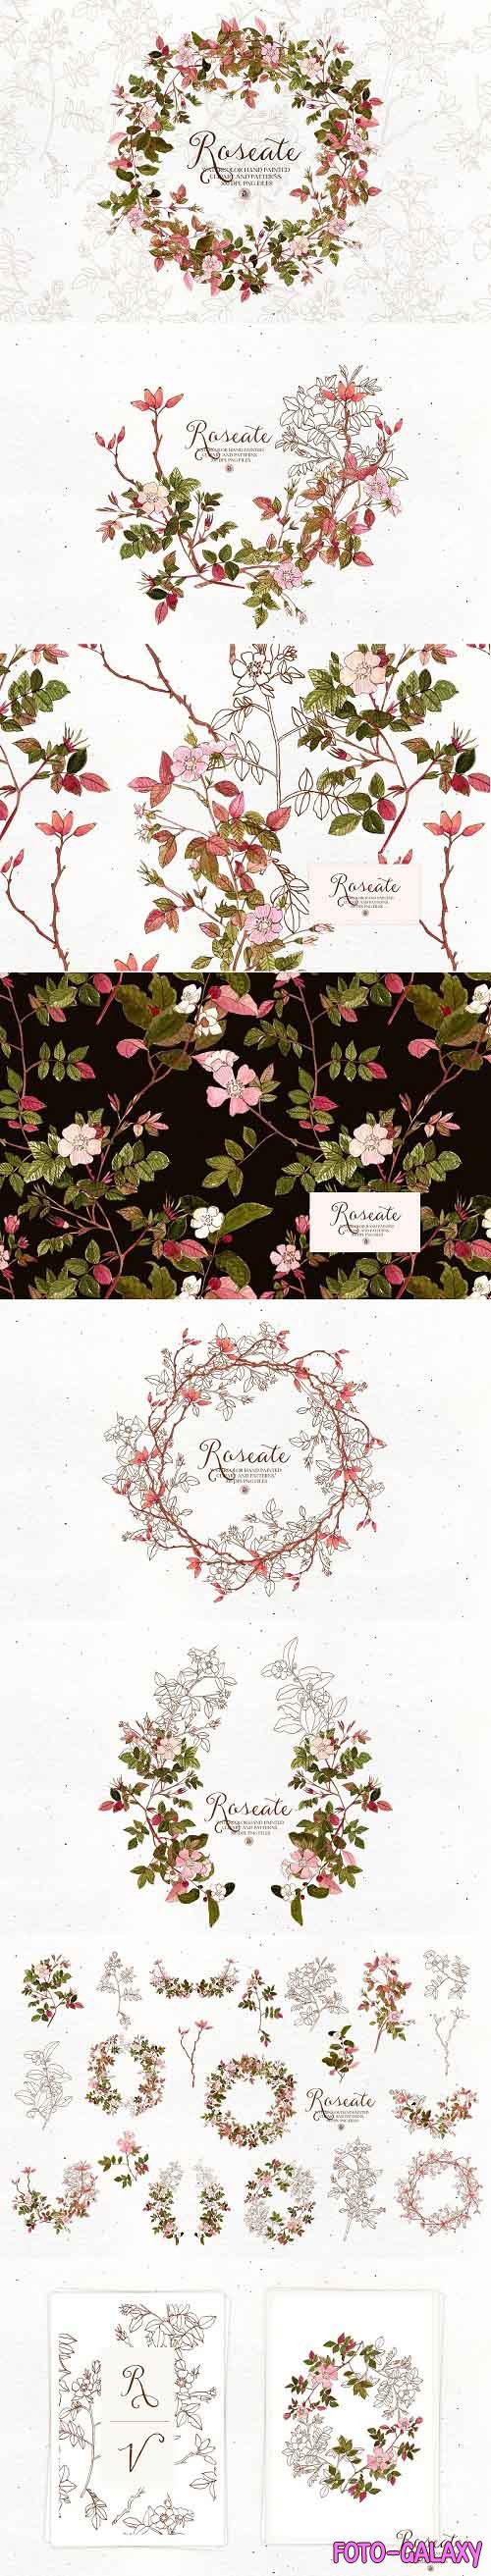 Roseate - watercolor floral clipart - 5807664